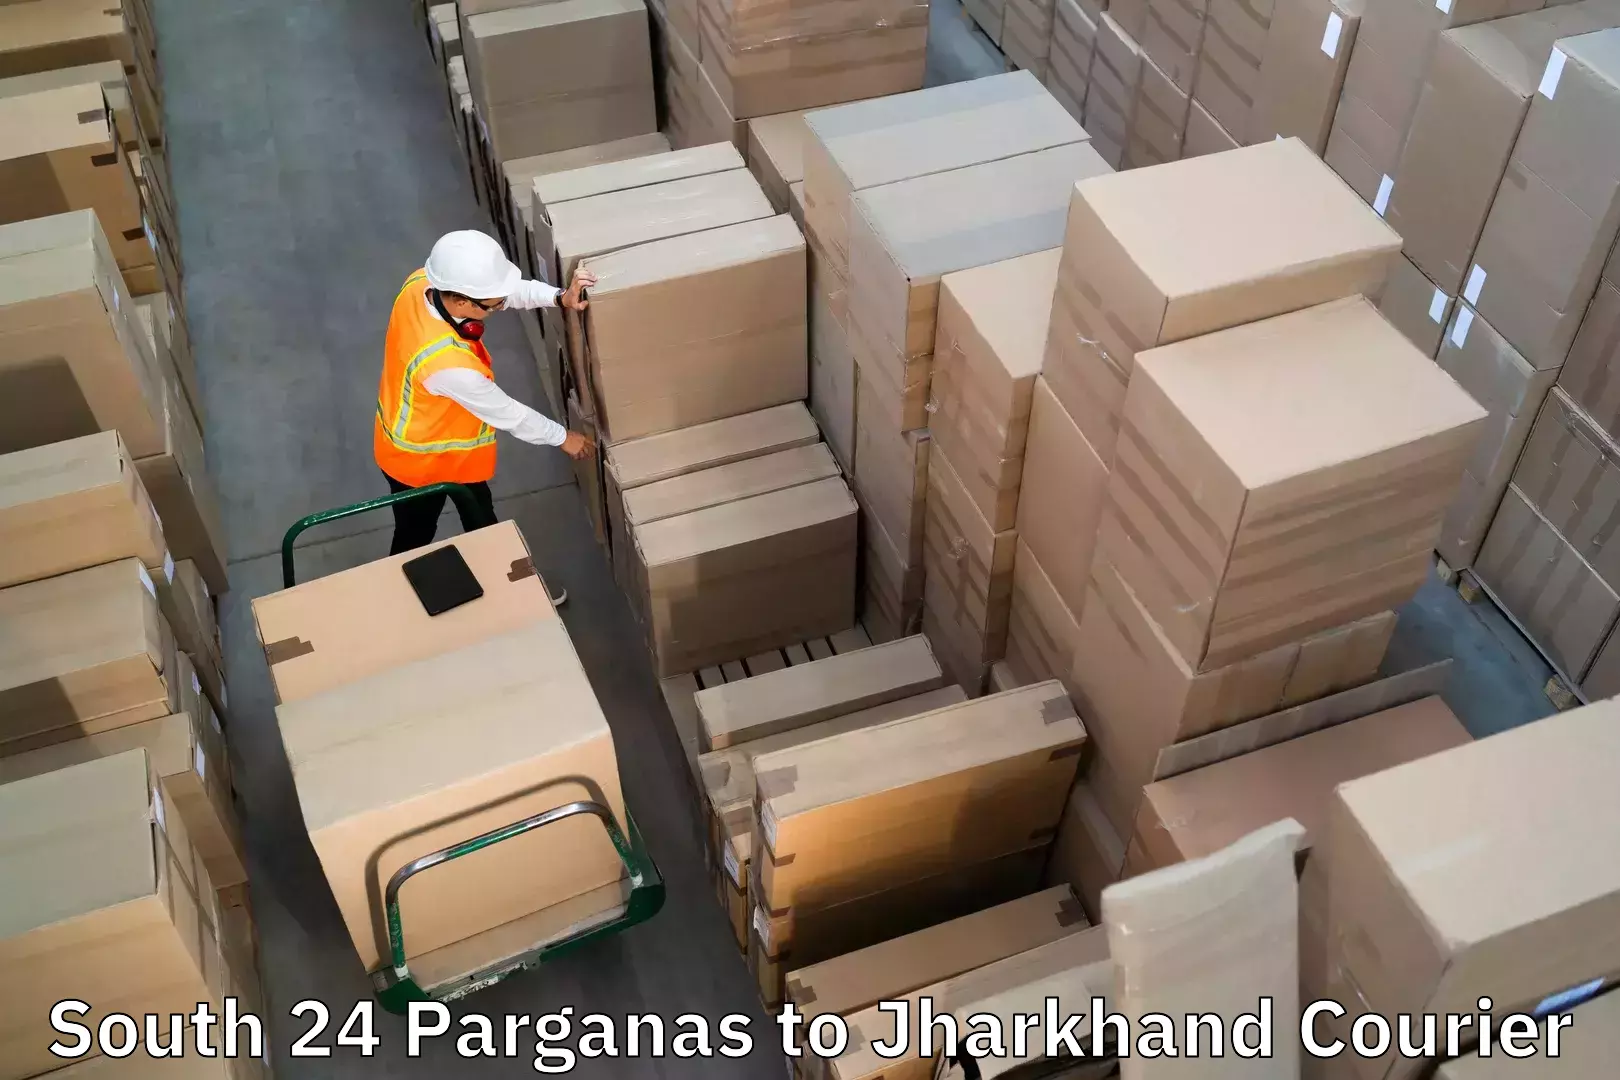 Baggage relocation service South 24 Parganas to Jharkhand